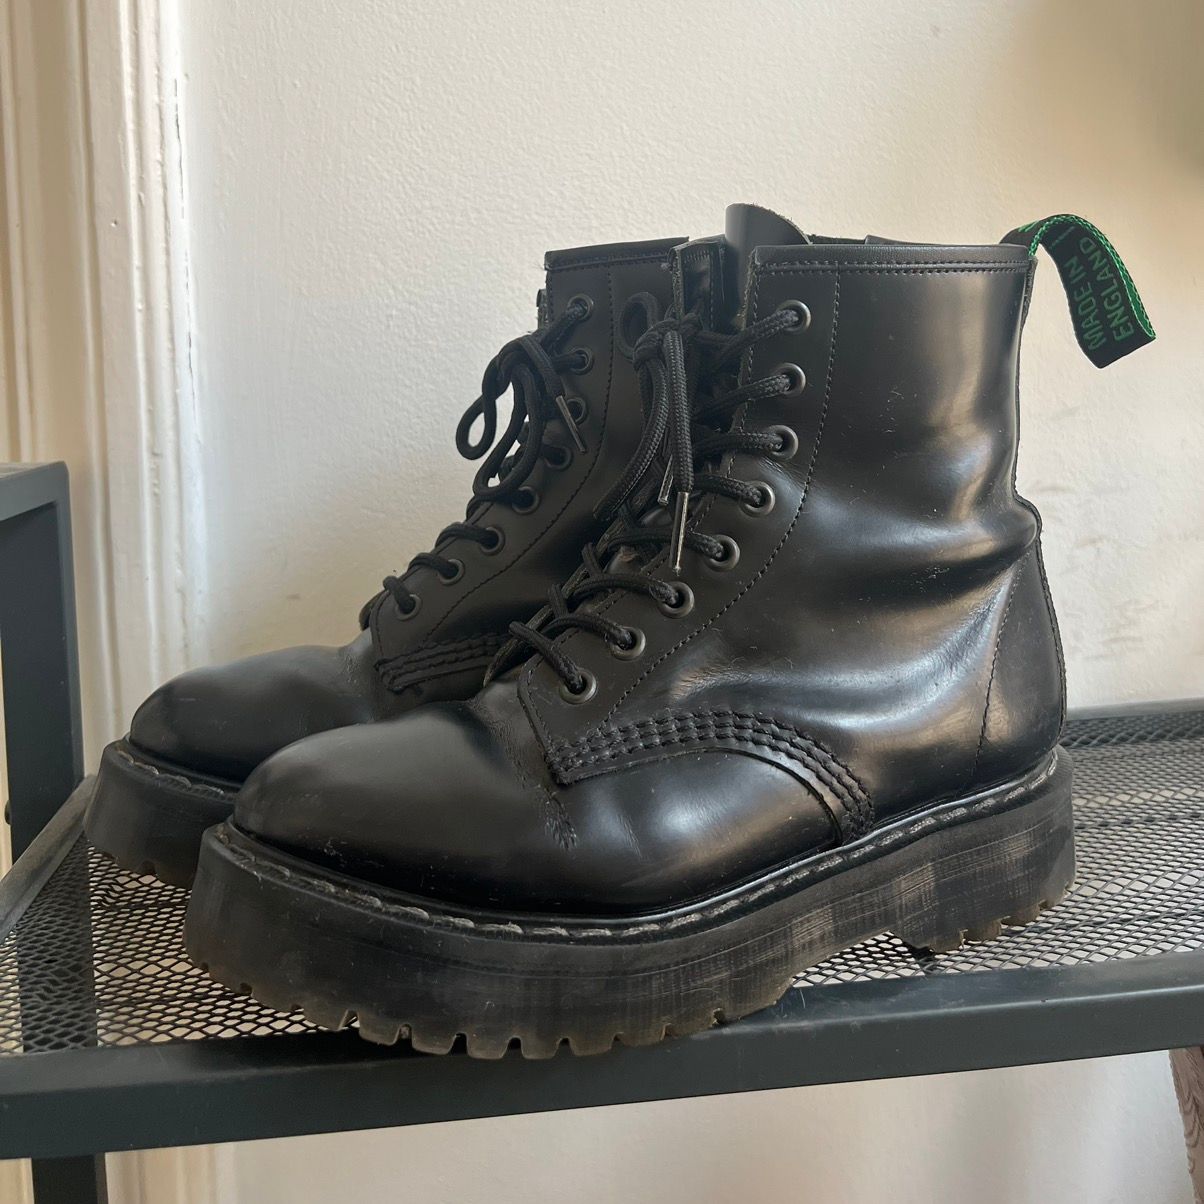 Solovair NPS Solovair Platform boots (with Box) | Grailed